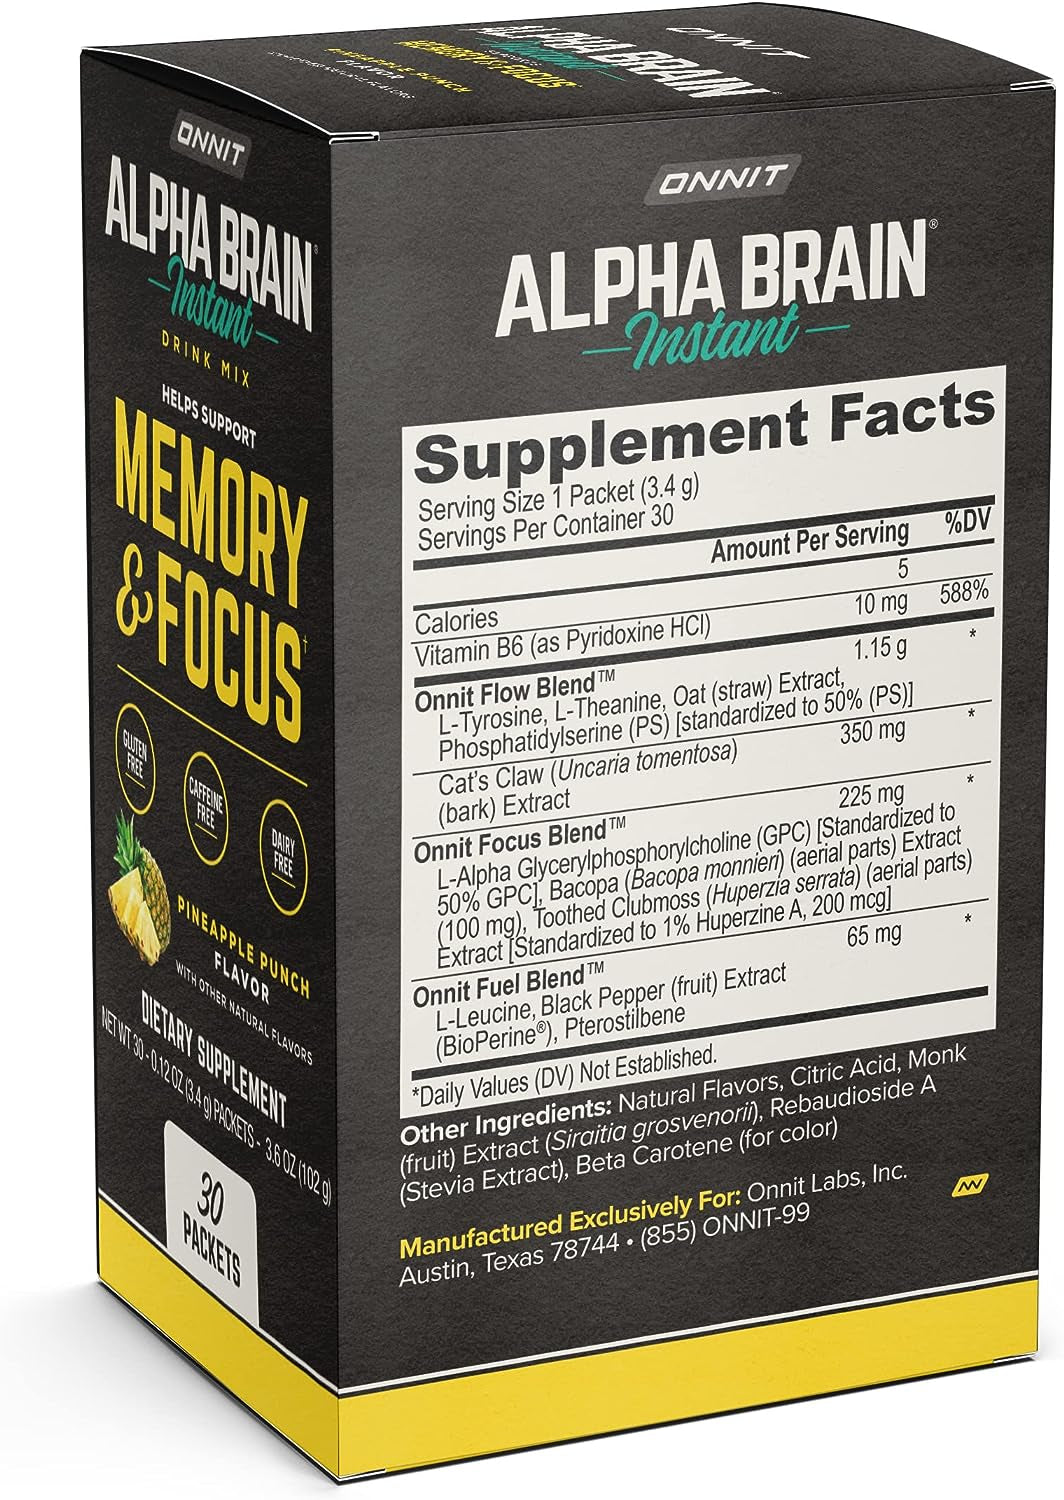 Alpha Brain Instant - Pineapple Punch Flavor - Nootropic Brain Booster Memory Supplement - Brain Support for Focus, Energy & Clarity - Alpha GPC Choline, Cats Claw, L-Theanine, Bacopa - 30Ct